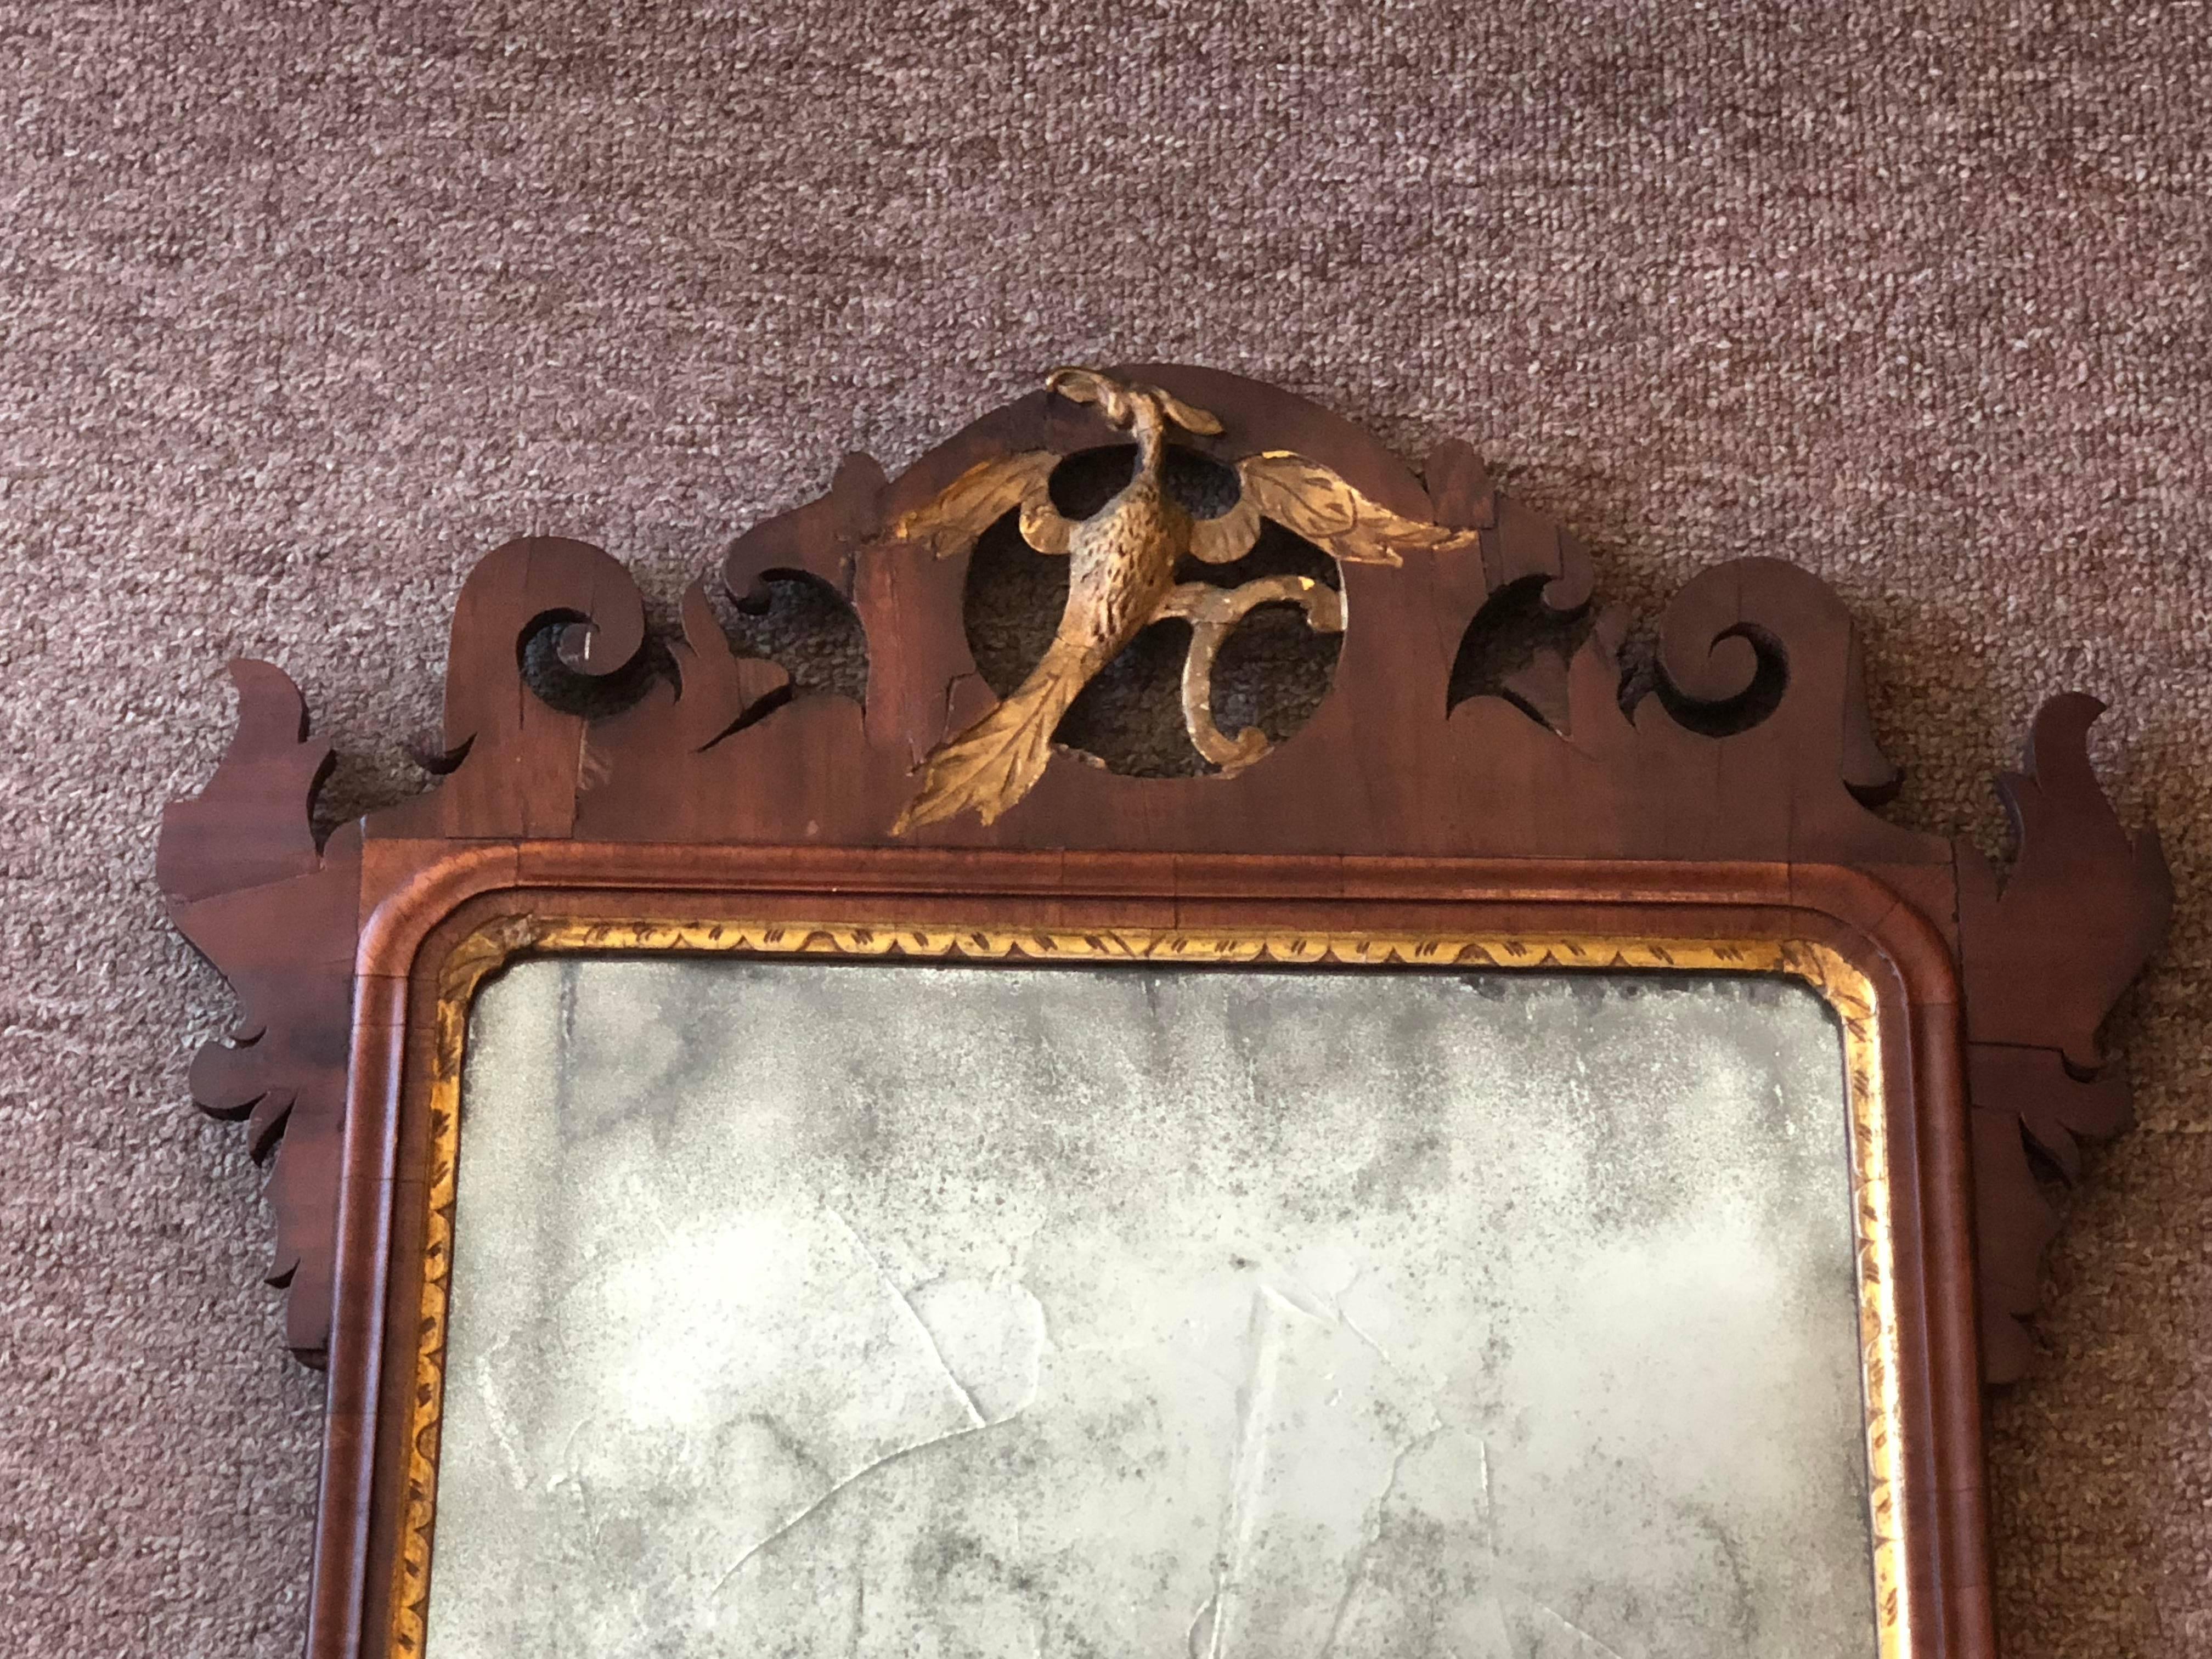 English Chippendale mirror with carved phoenix crest, giltwood, mahogany veneer, original mirrored glass.
 